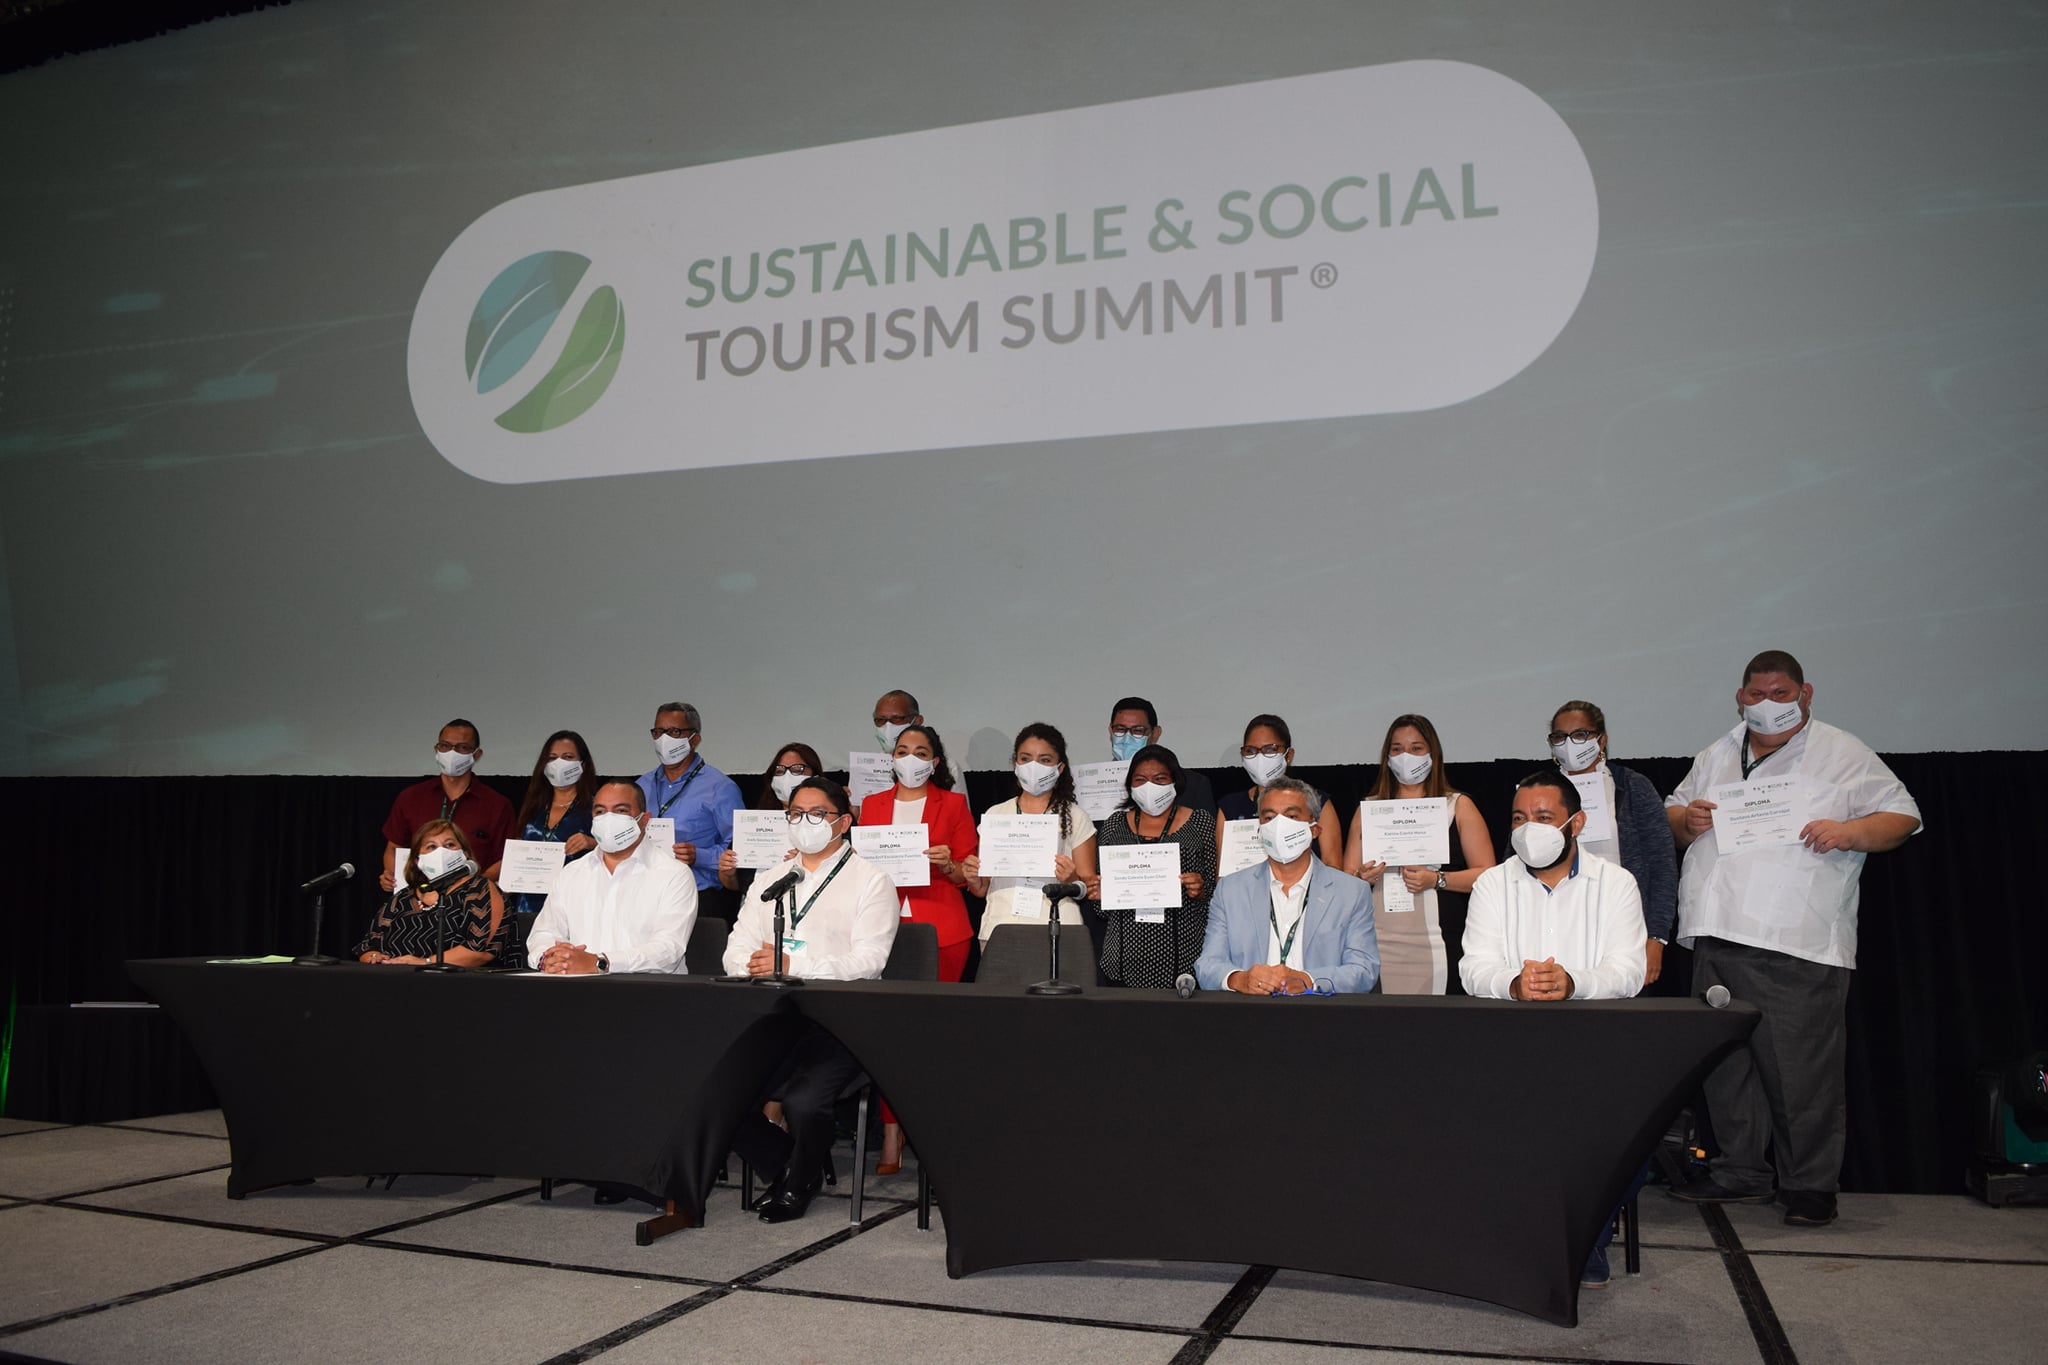 At the Sustainable & Social Tourism Summit, the Diploma in Sustainable and Social Tourism concluded successfully